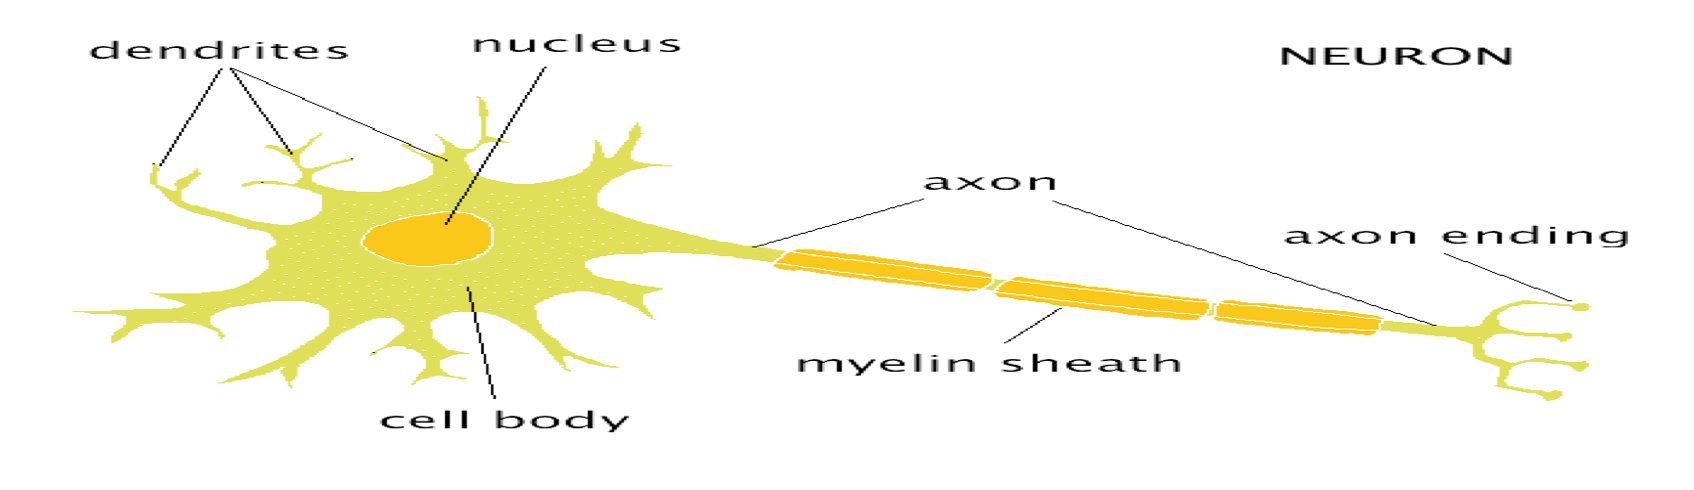 <p><span style="font-family: Franklin Gothic Book">Layer of fat surrounding most axons</span></p><p style="text-align: start">&nbsp;</p>